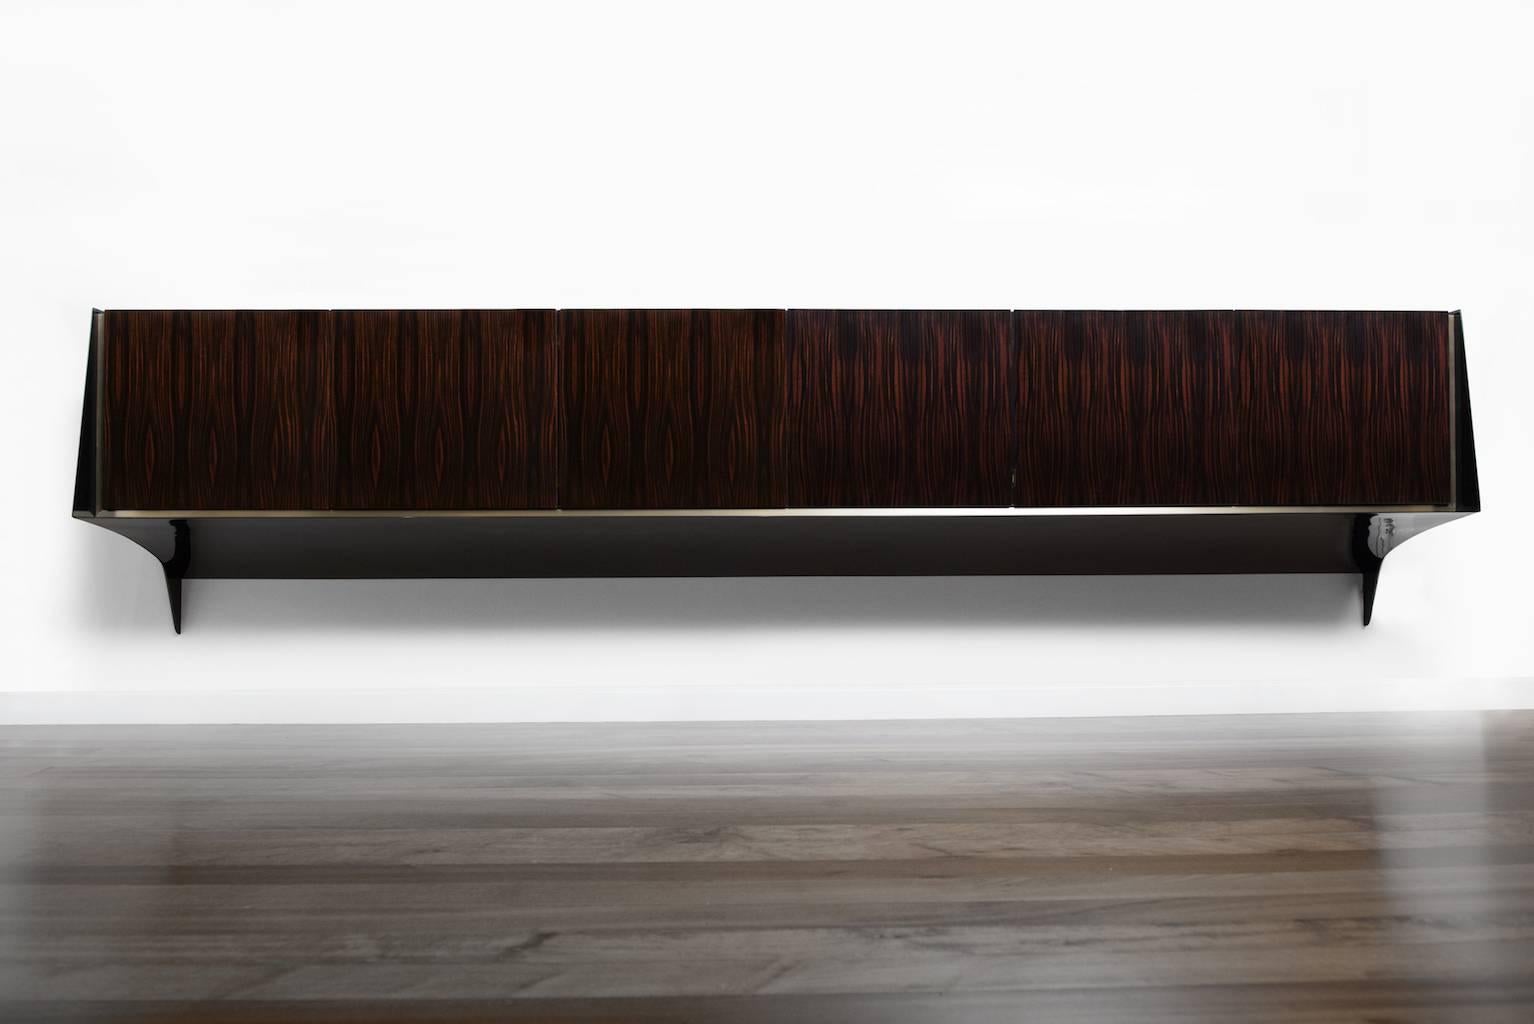 Shown in French polished Macassar ebony and black lacquer, with sycamore interior. The base of the sideboard is not parallel to the floor but curved towards the wall. 
The Keel credenza by Pipim is customizable to any dimension and is available in a